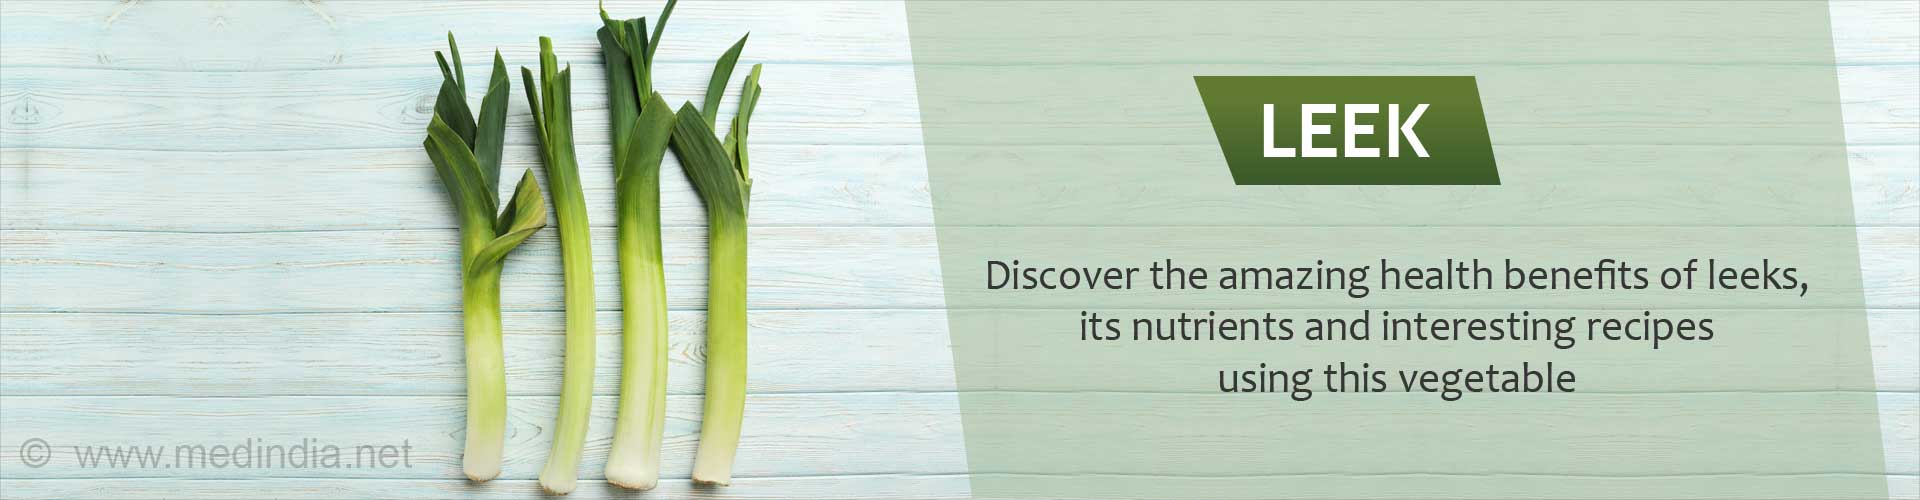 Leeks - Discover the amazing benefits of leeks, its nutrients and interesting recipes using this vegetable